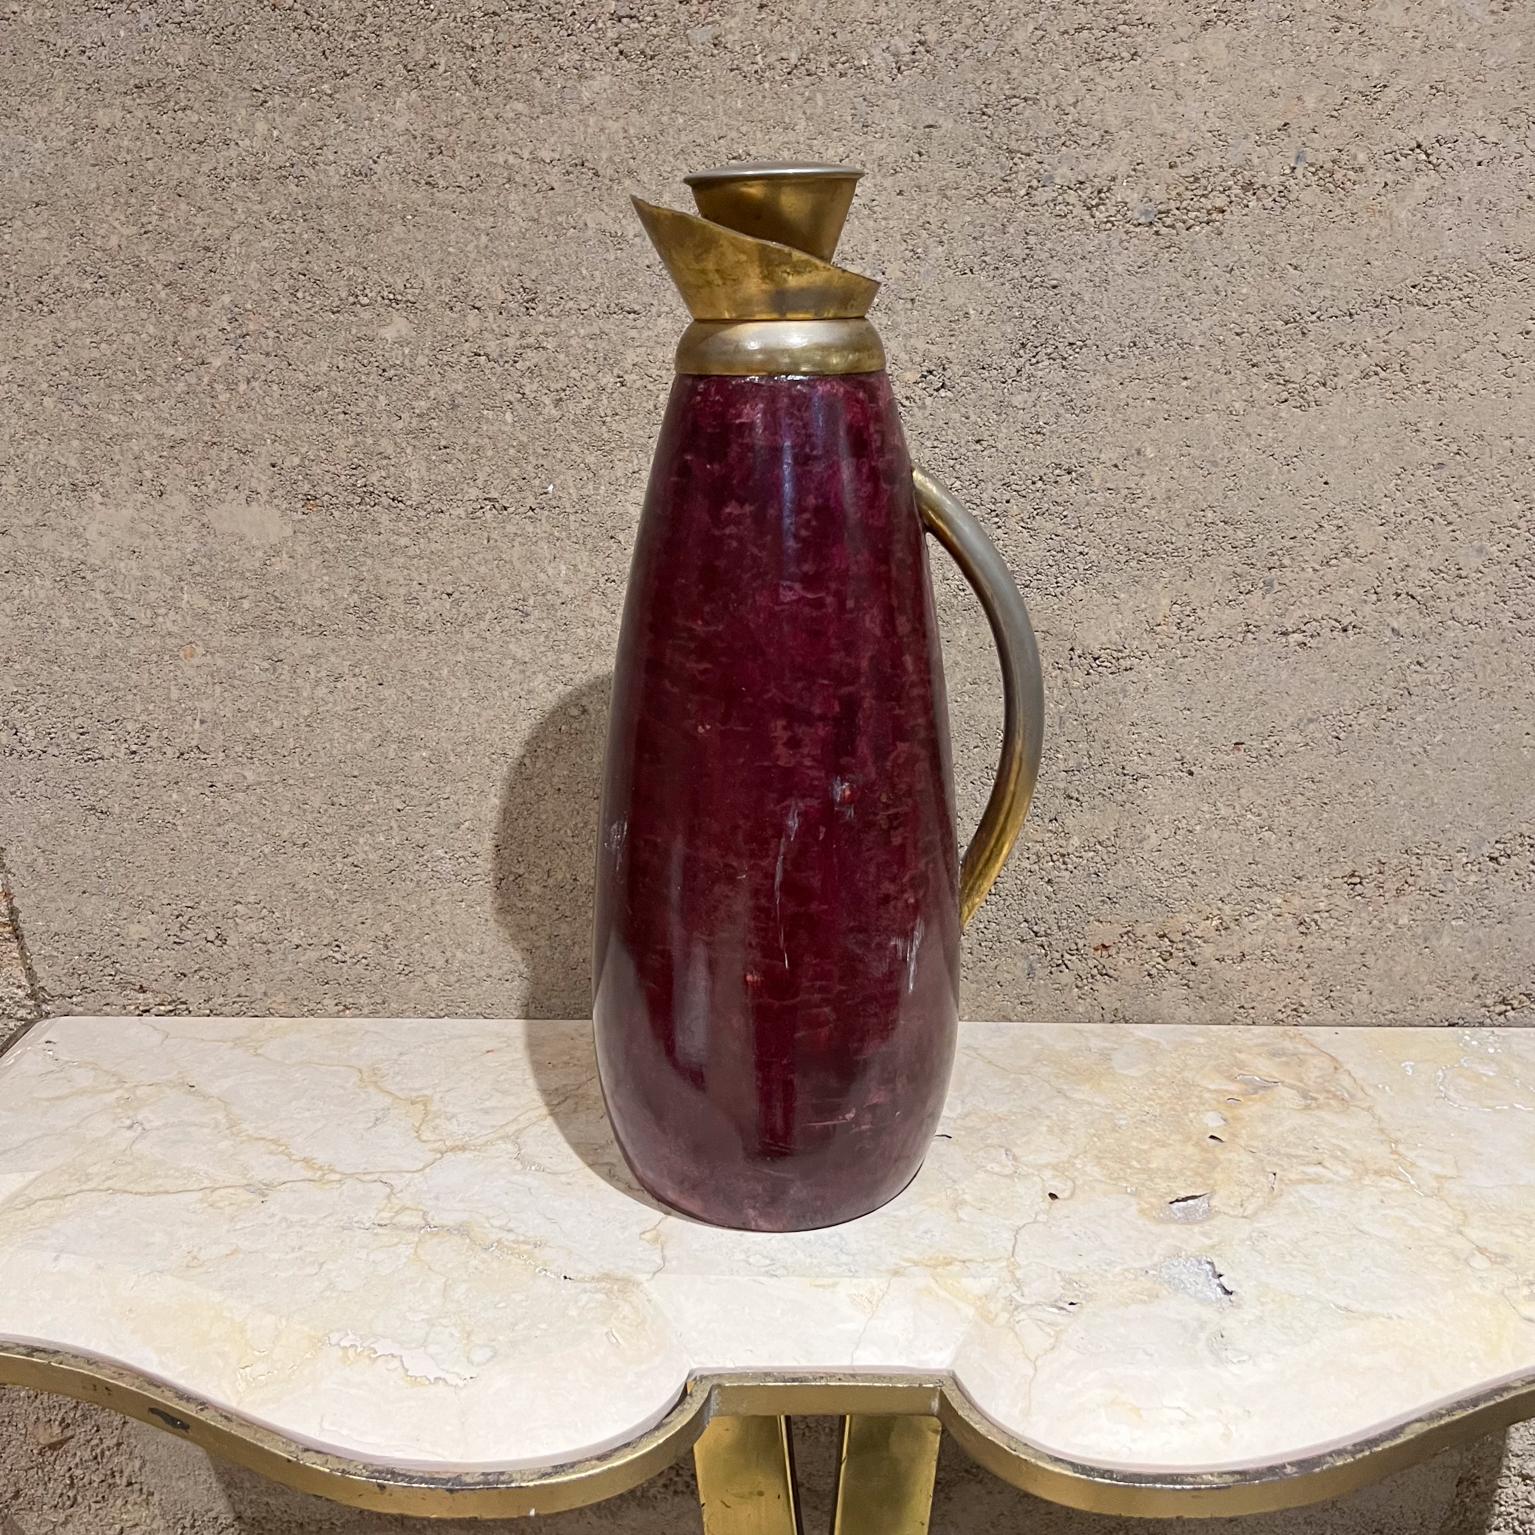 Italy 1960s Aldo Tura vintage pitcher carafe burgundy purple wine hues parchment goatskin
Handle and cork stopper in brass plated metal.
Label from the maker.
14.5 h x 6 d x 5 diameter
Please expect preowned original unrestored vintage